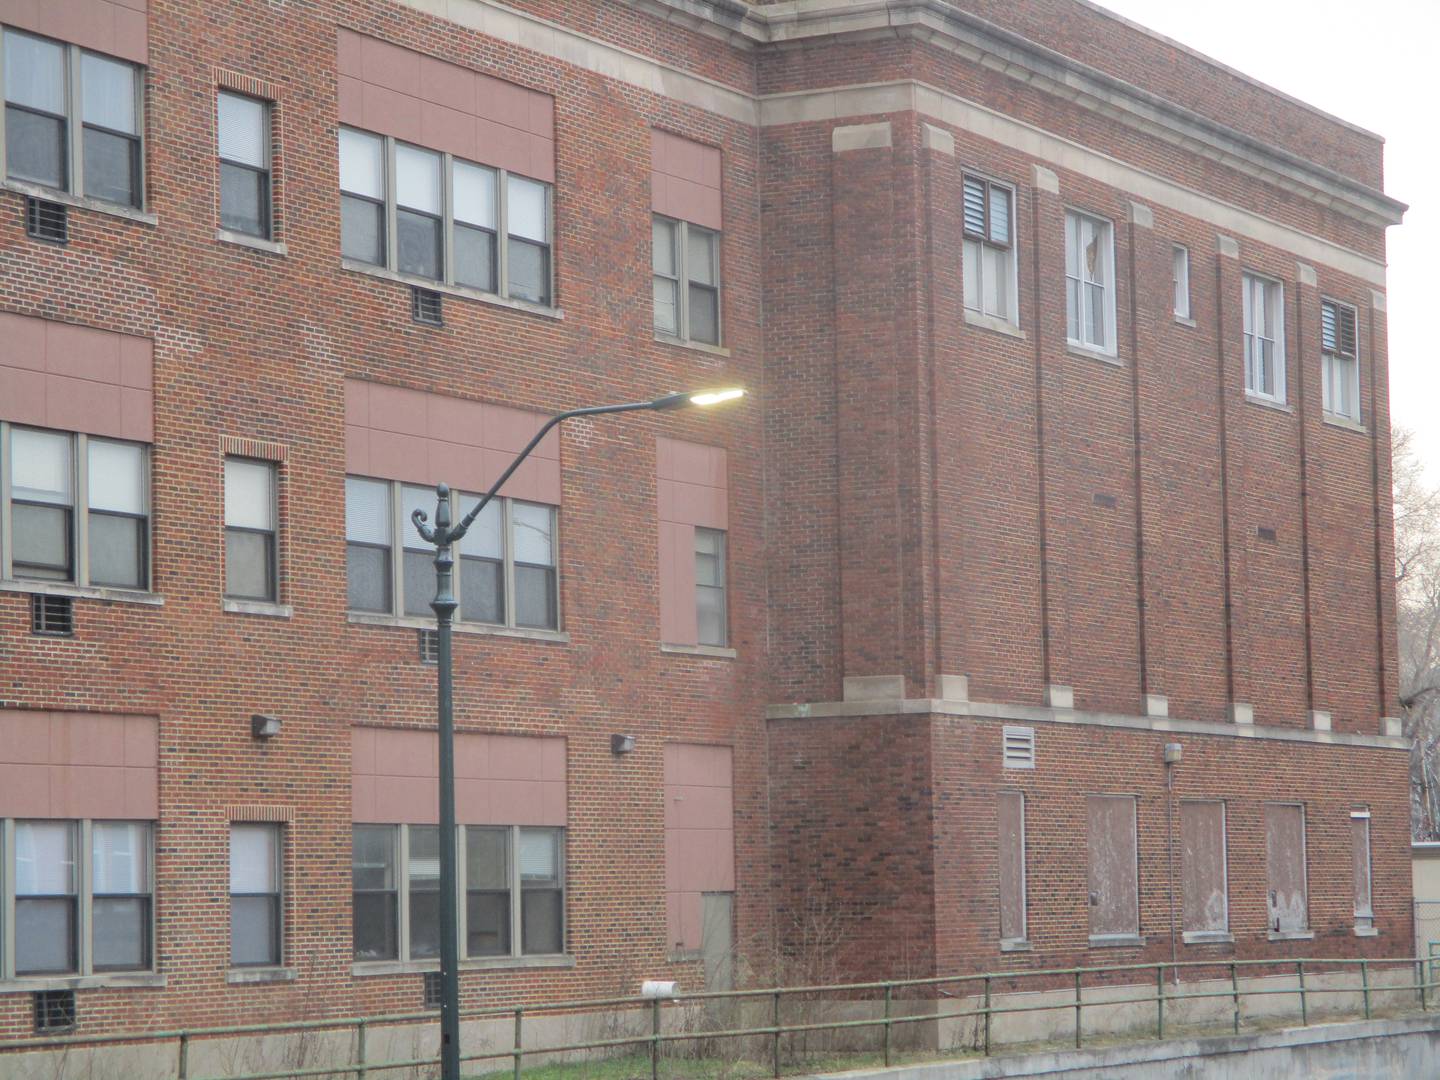 The gym and cafeteria of the old Joliet Catholic High School juts outs from a section of the building that contains senior residences at the Victory Centre of Joliet. March 13, 2024.